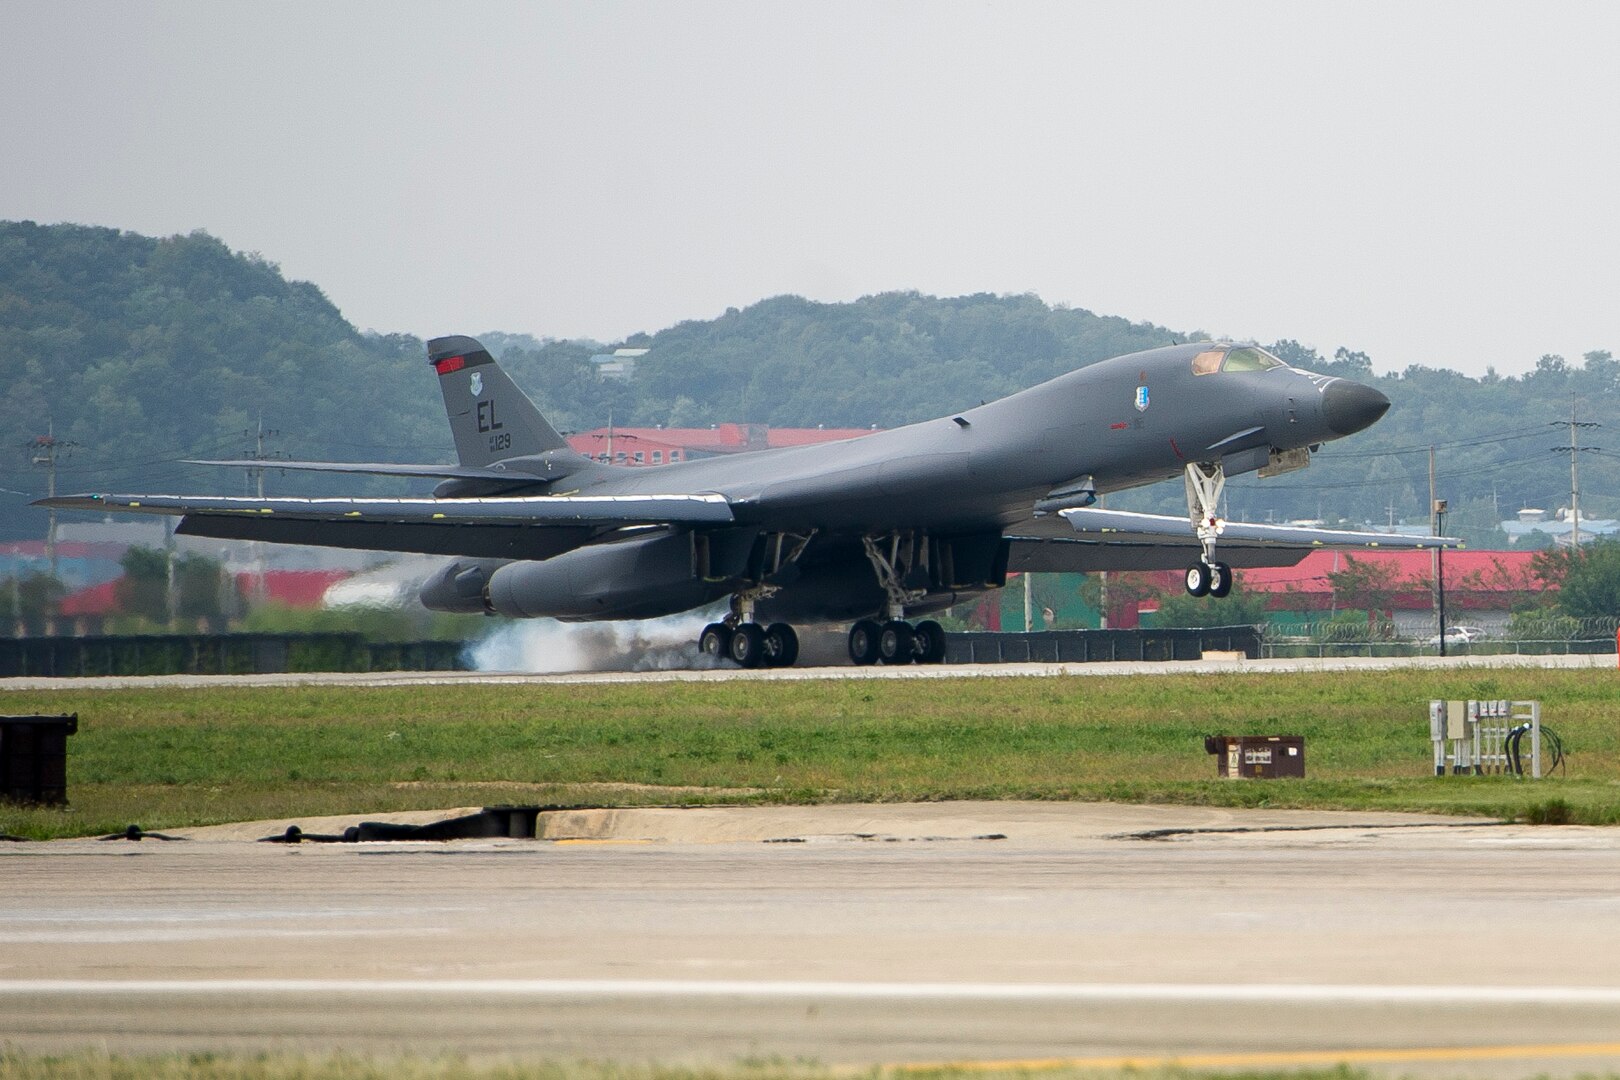 A U.S. Air Force B-1B Lancer deployed from Andersen Air Base, Guam, performs a landing at Osan Air Base, Republic of Korea, Sept. 21, 2016. This is the first time the Lancer has landed on the Korean peninsula in 20 years. The B-1 is the backbone of the U.S. long-range bomber mission and is capable of carrying the largest payload of both guided and unguided weapons in the Air Force inventory.(U.S. Air Force photo by Staff Sgt. Jonathan Steffen)